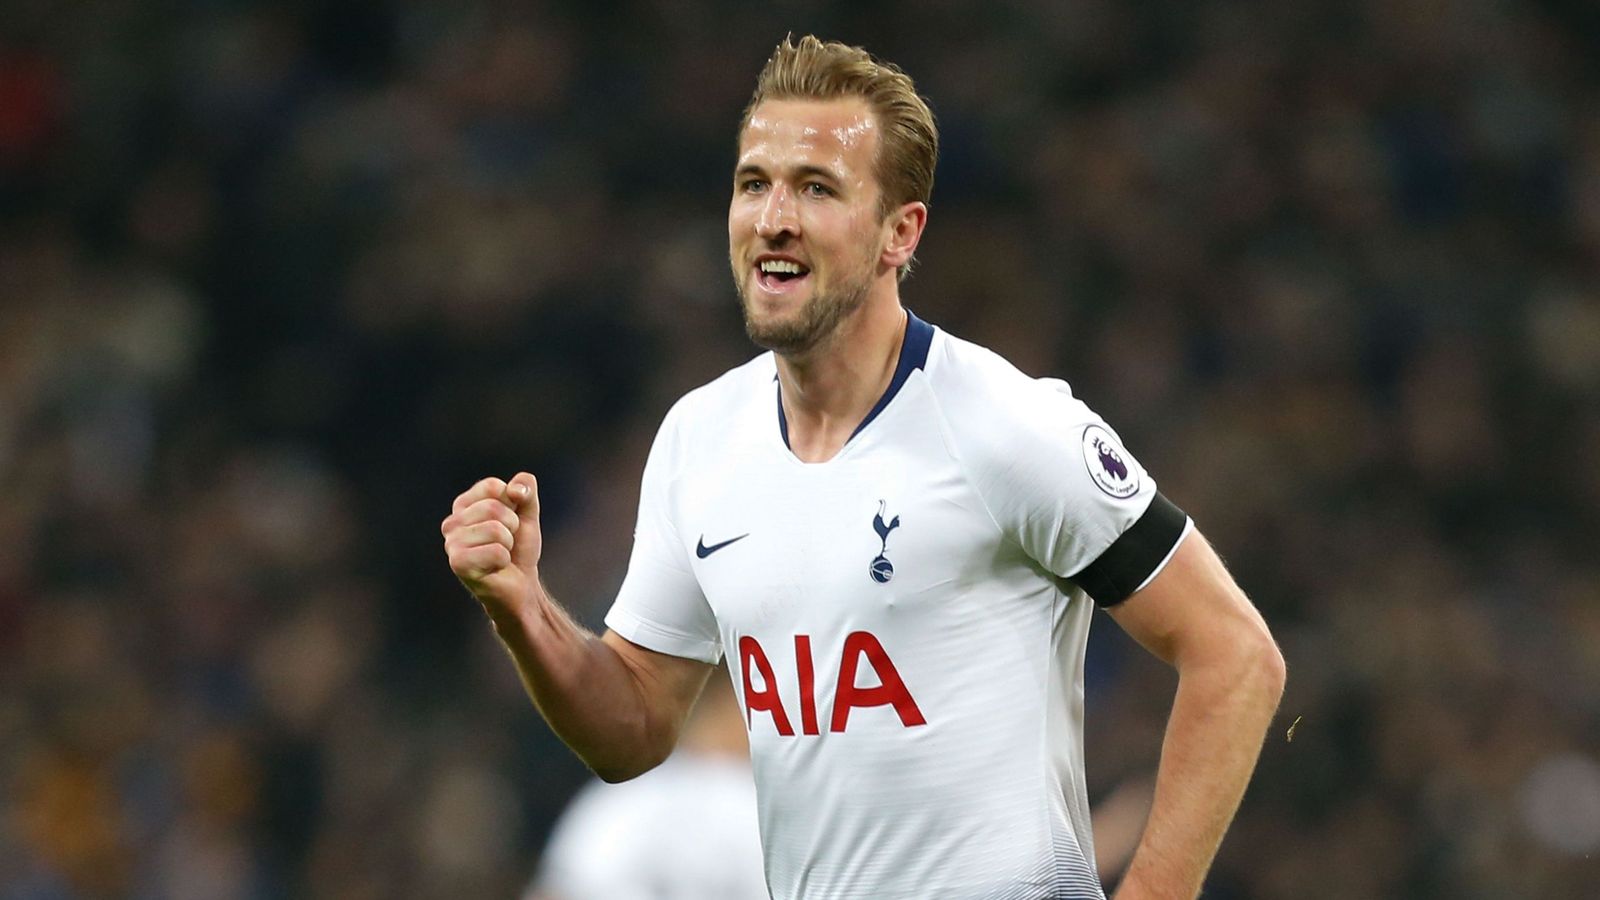 Watch: Premier League's Harry Kane casually hits 50-yard FG at New York  Giants facility, needs NFL job right now 